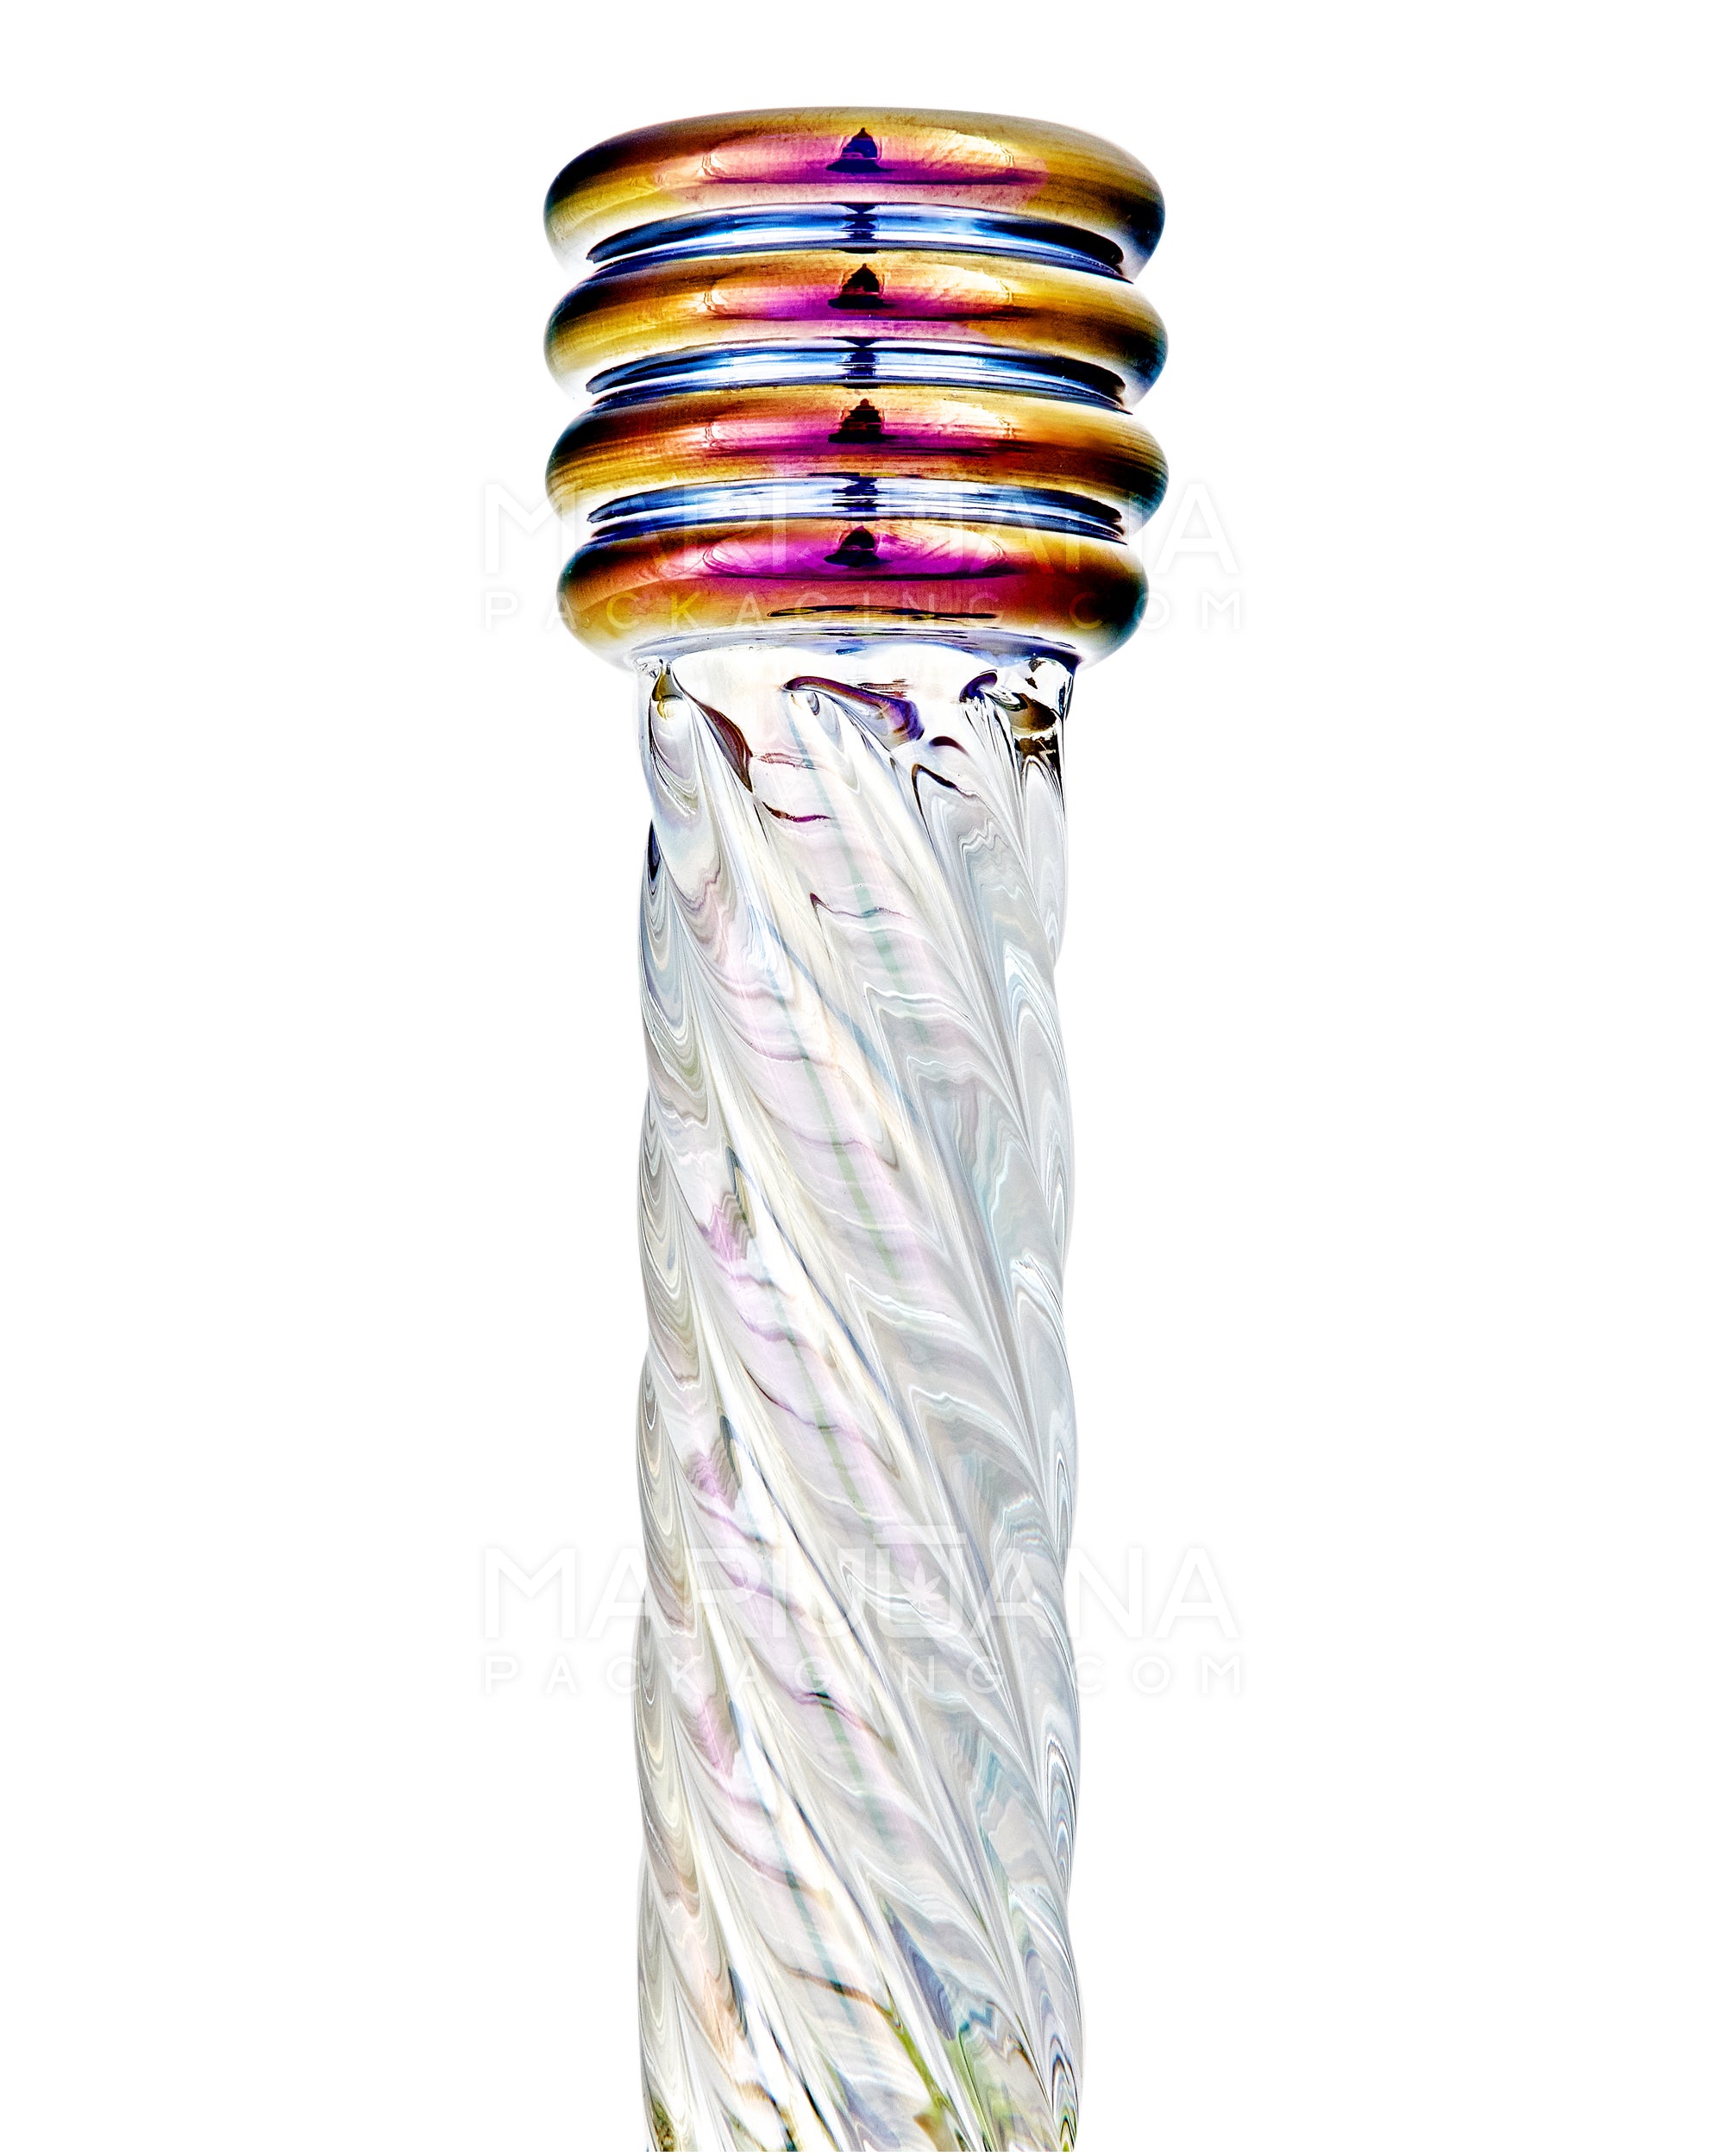 Spiral Neck Diffused Perc Honey Bee Glass Bell Water Pipe | 8in Tall - 14mm Bowl - Iridescent - 10